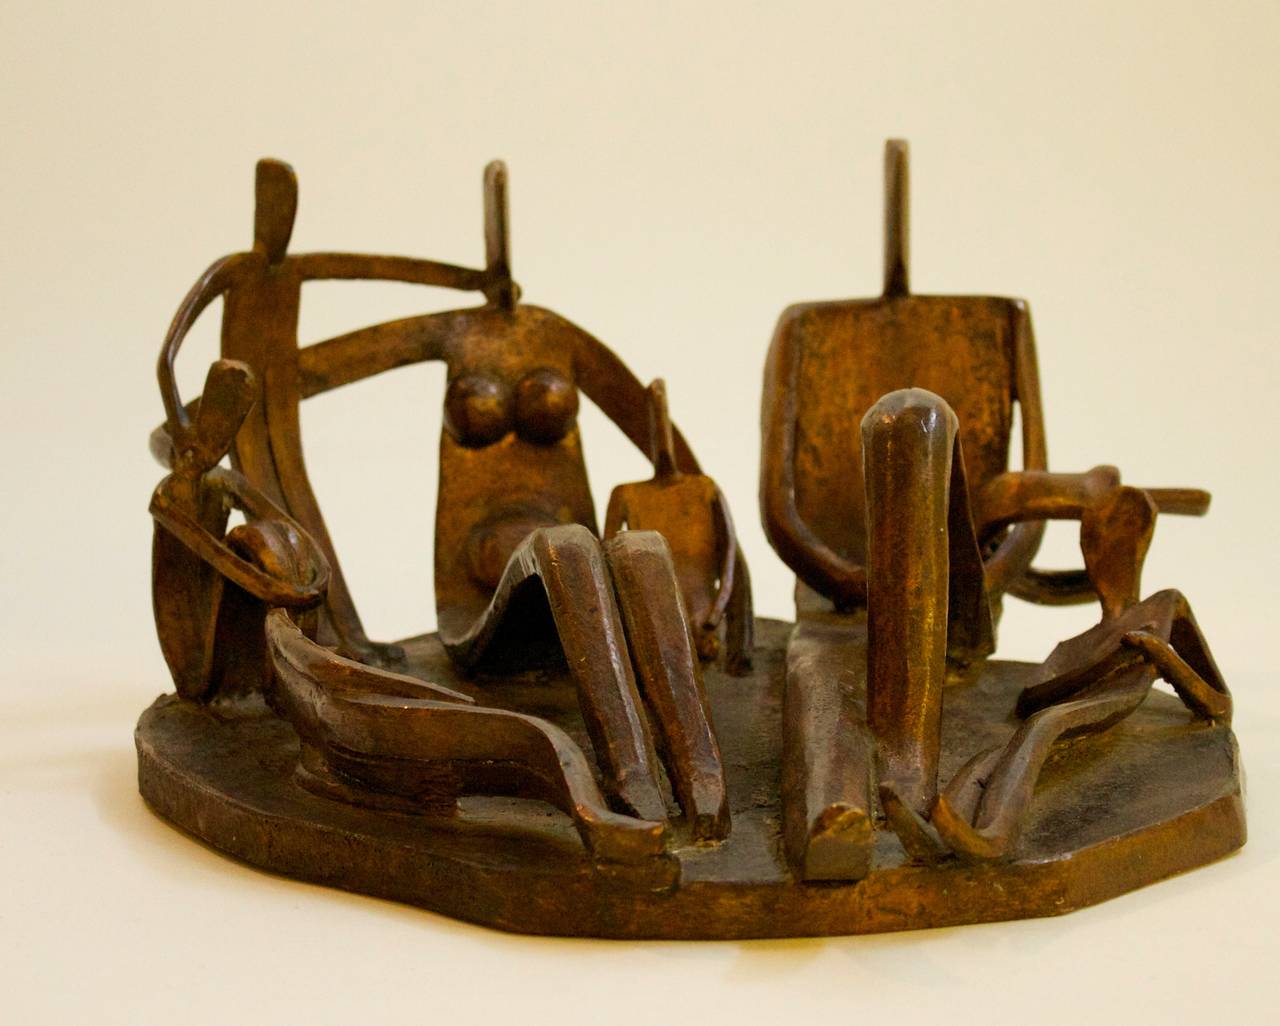 Stunning bronze abstract sculpture depicting a family relaxing together by artist Dudley Pratt. Pratt was an American sculptor who studied under Alexander Archipenko (who studied alongside Pablo Picasso). Pratts major work includes sculpture for the